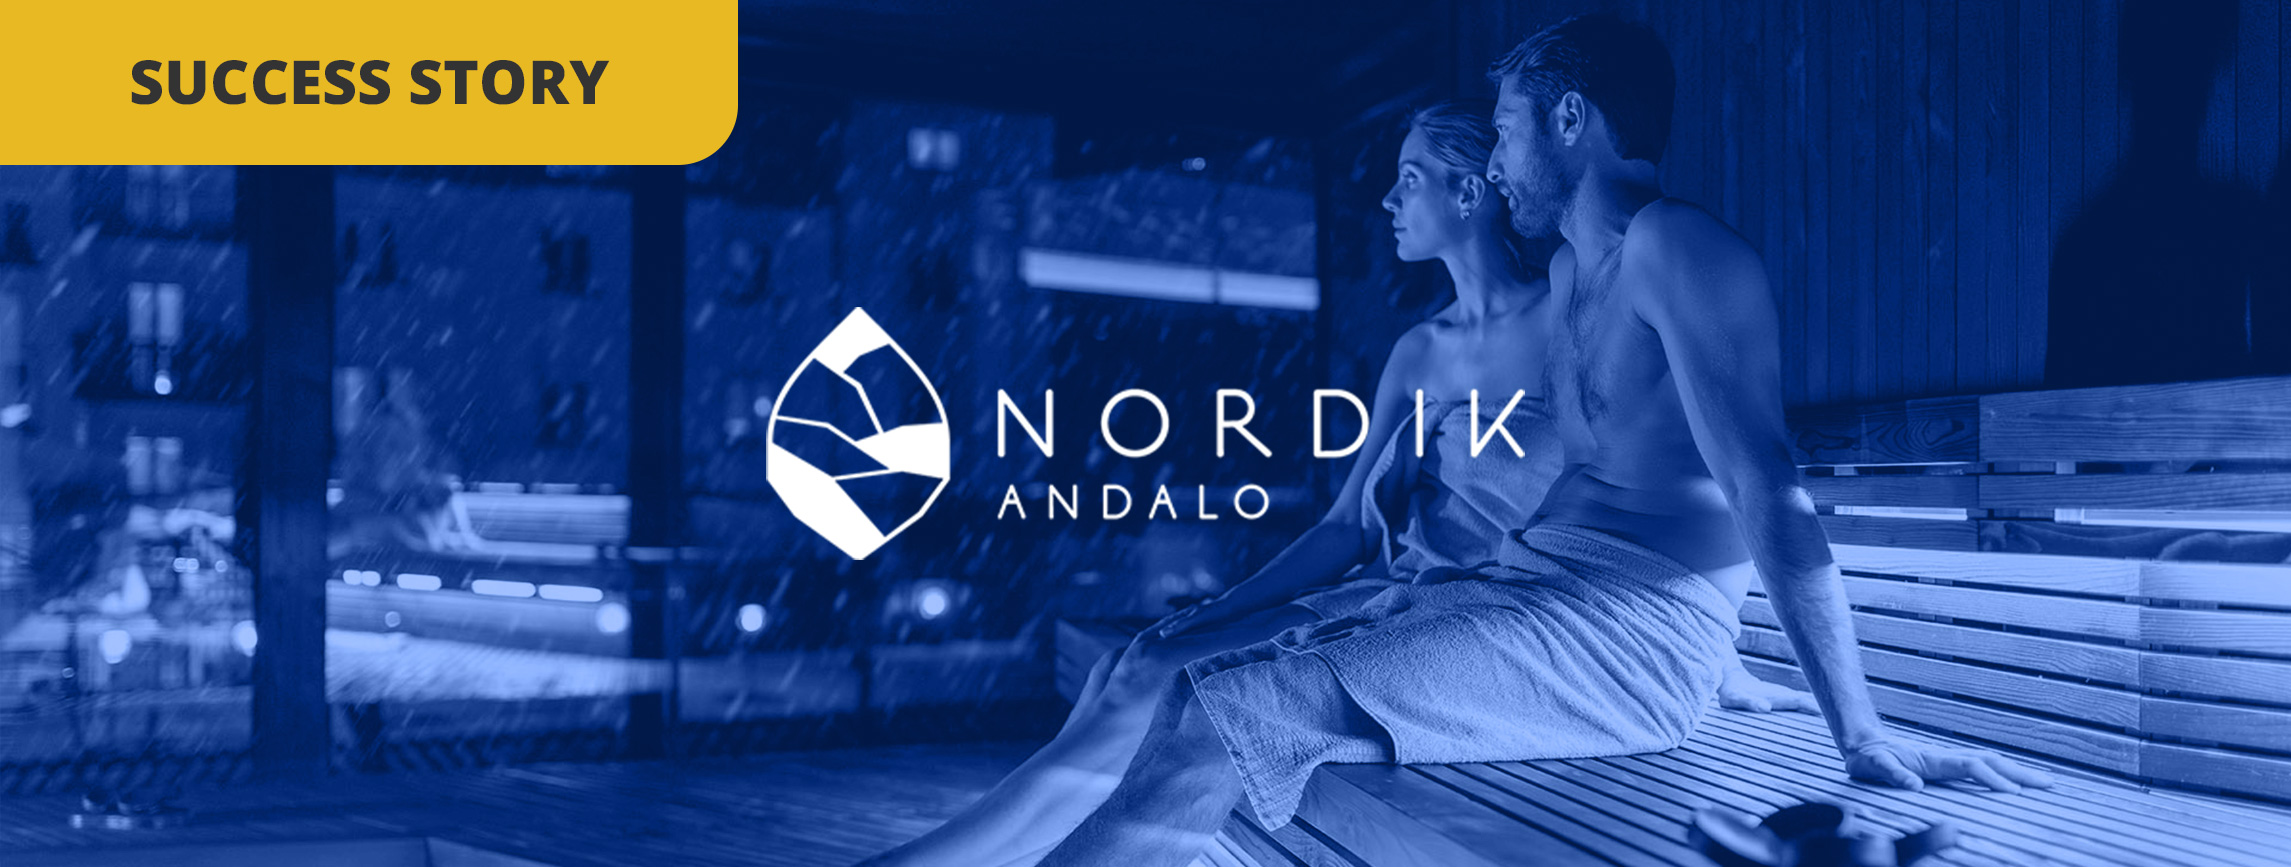 How Hotel Nordik use review and feedback management to achieve the no.1 spot on Tripadvisor